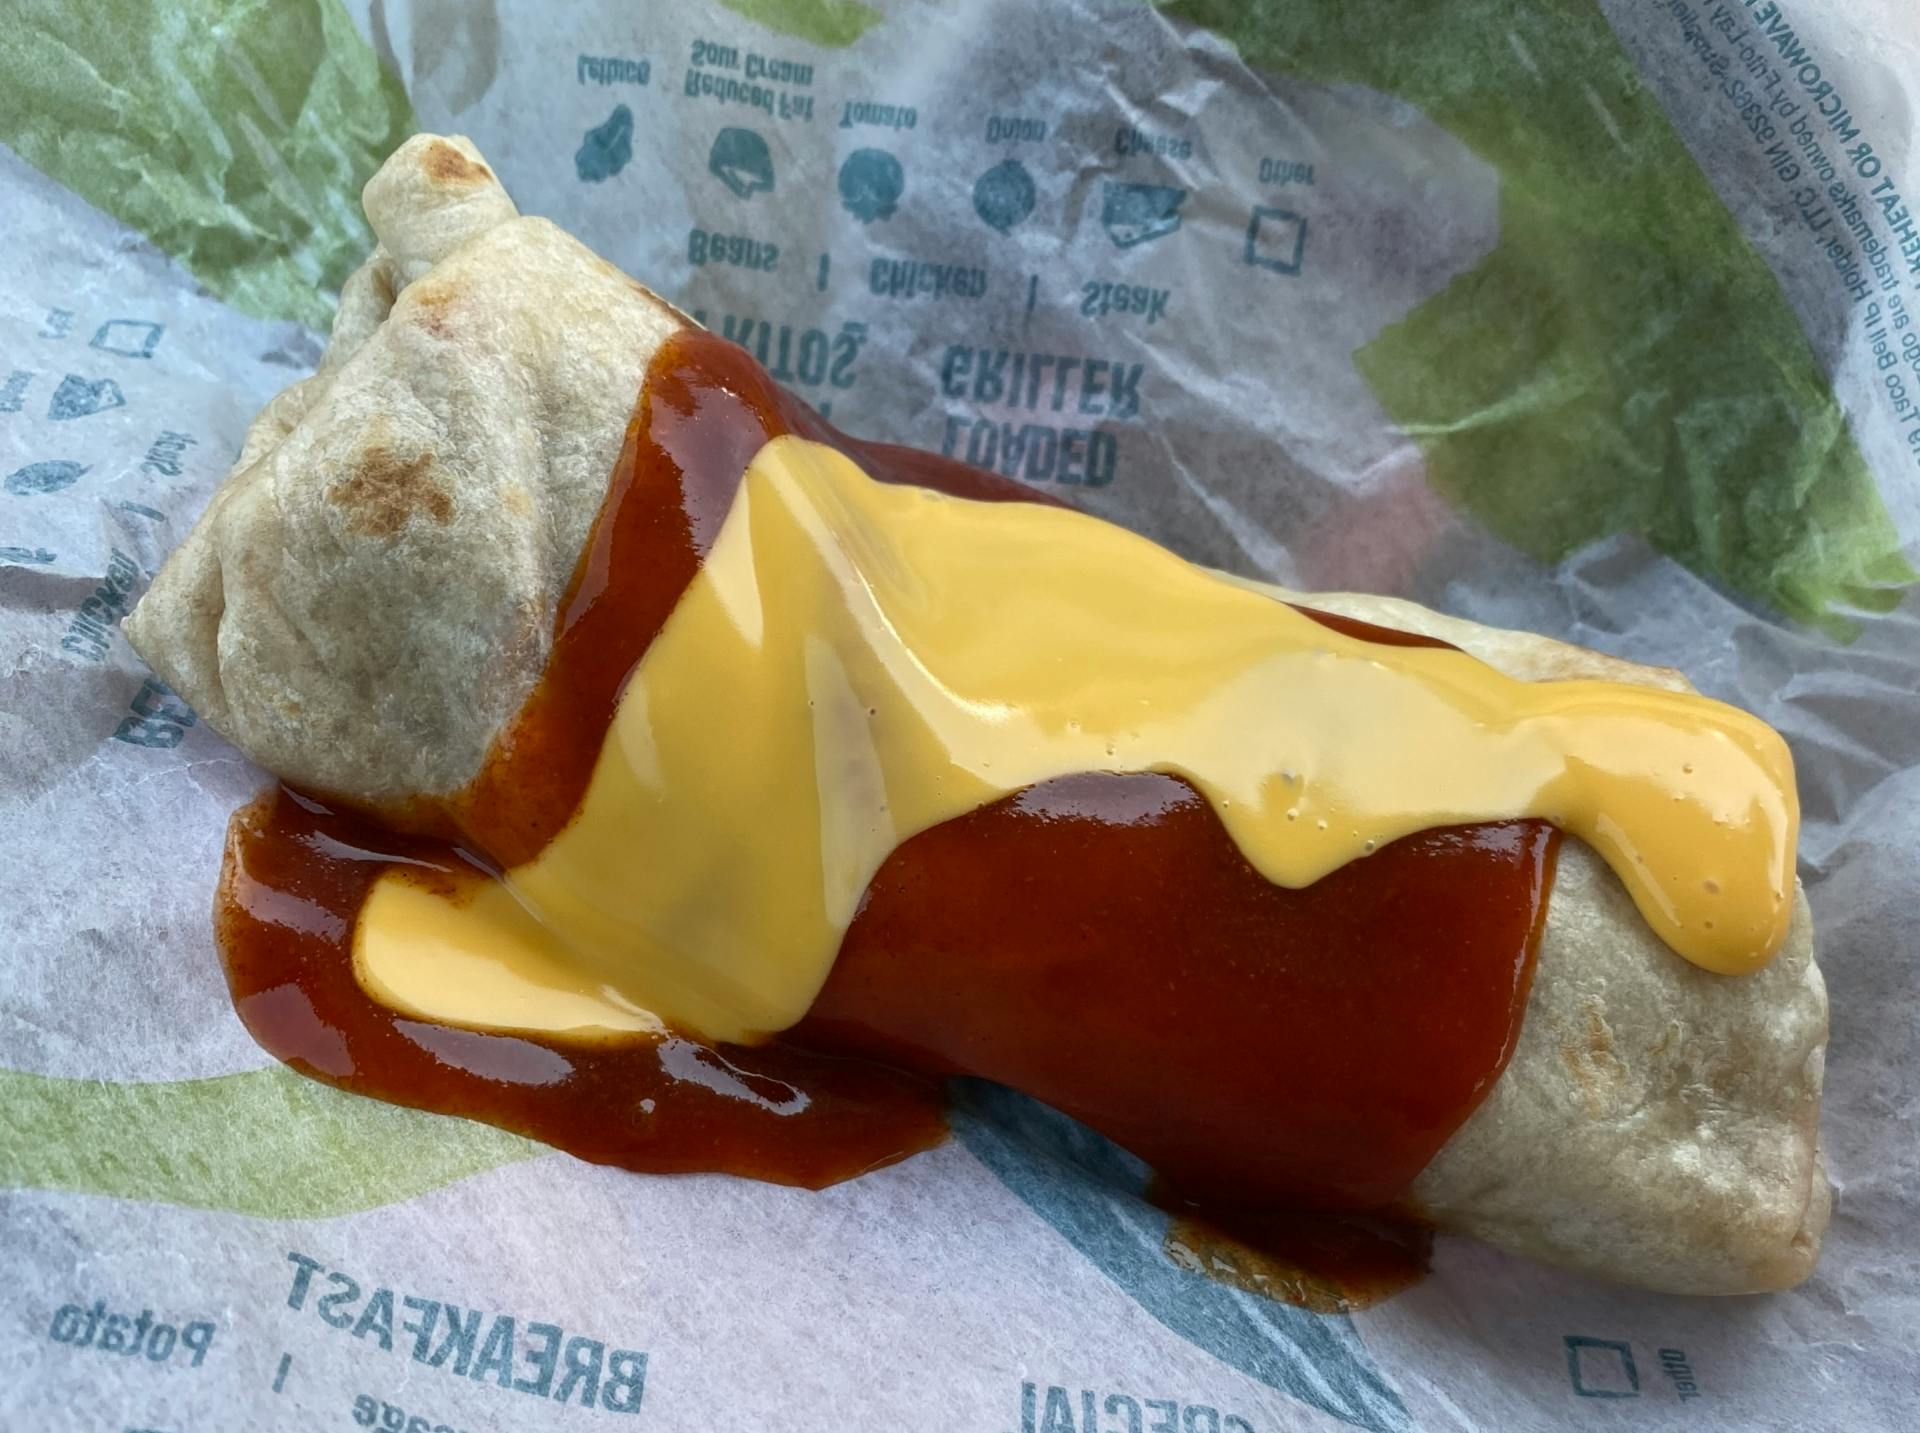 A close-up of a Taco Bell Enchirito sitting on its paper wrapper.